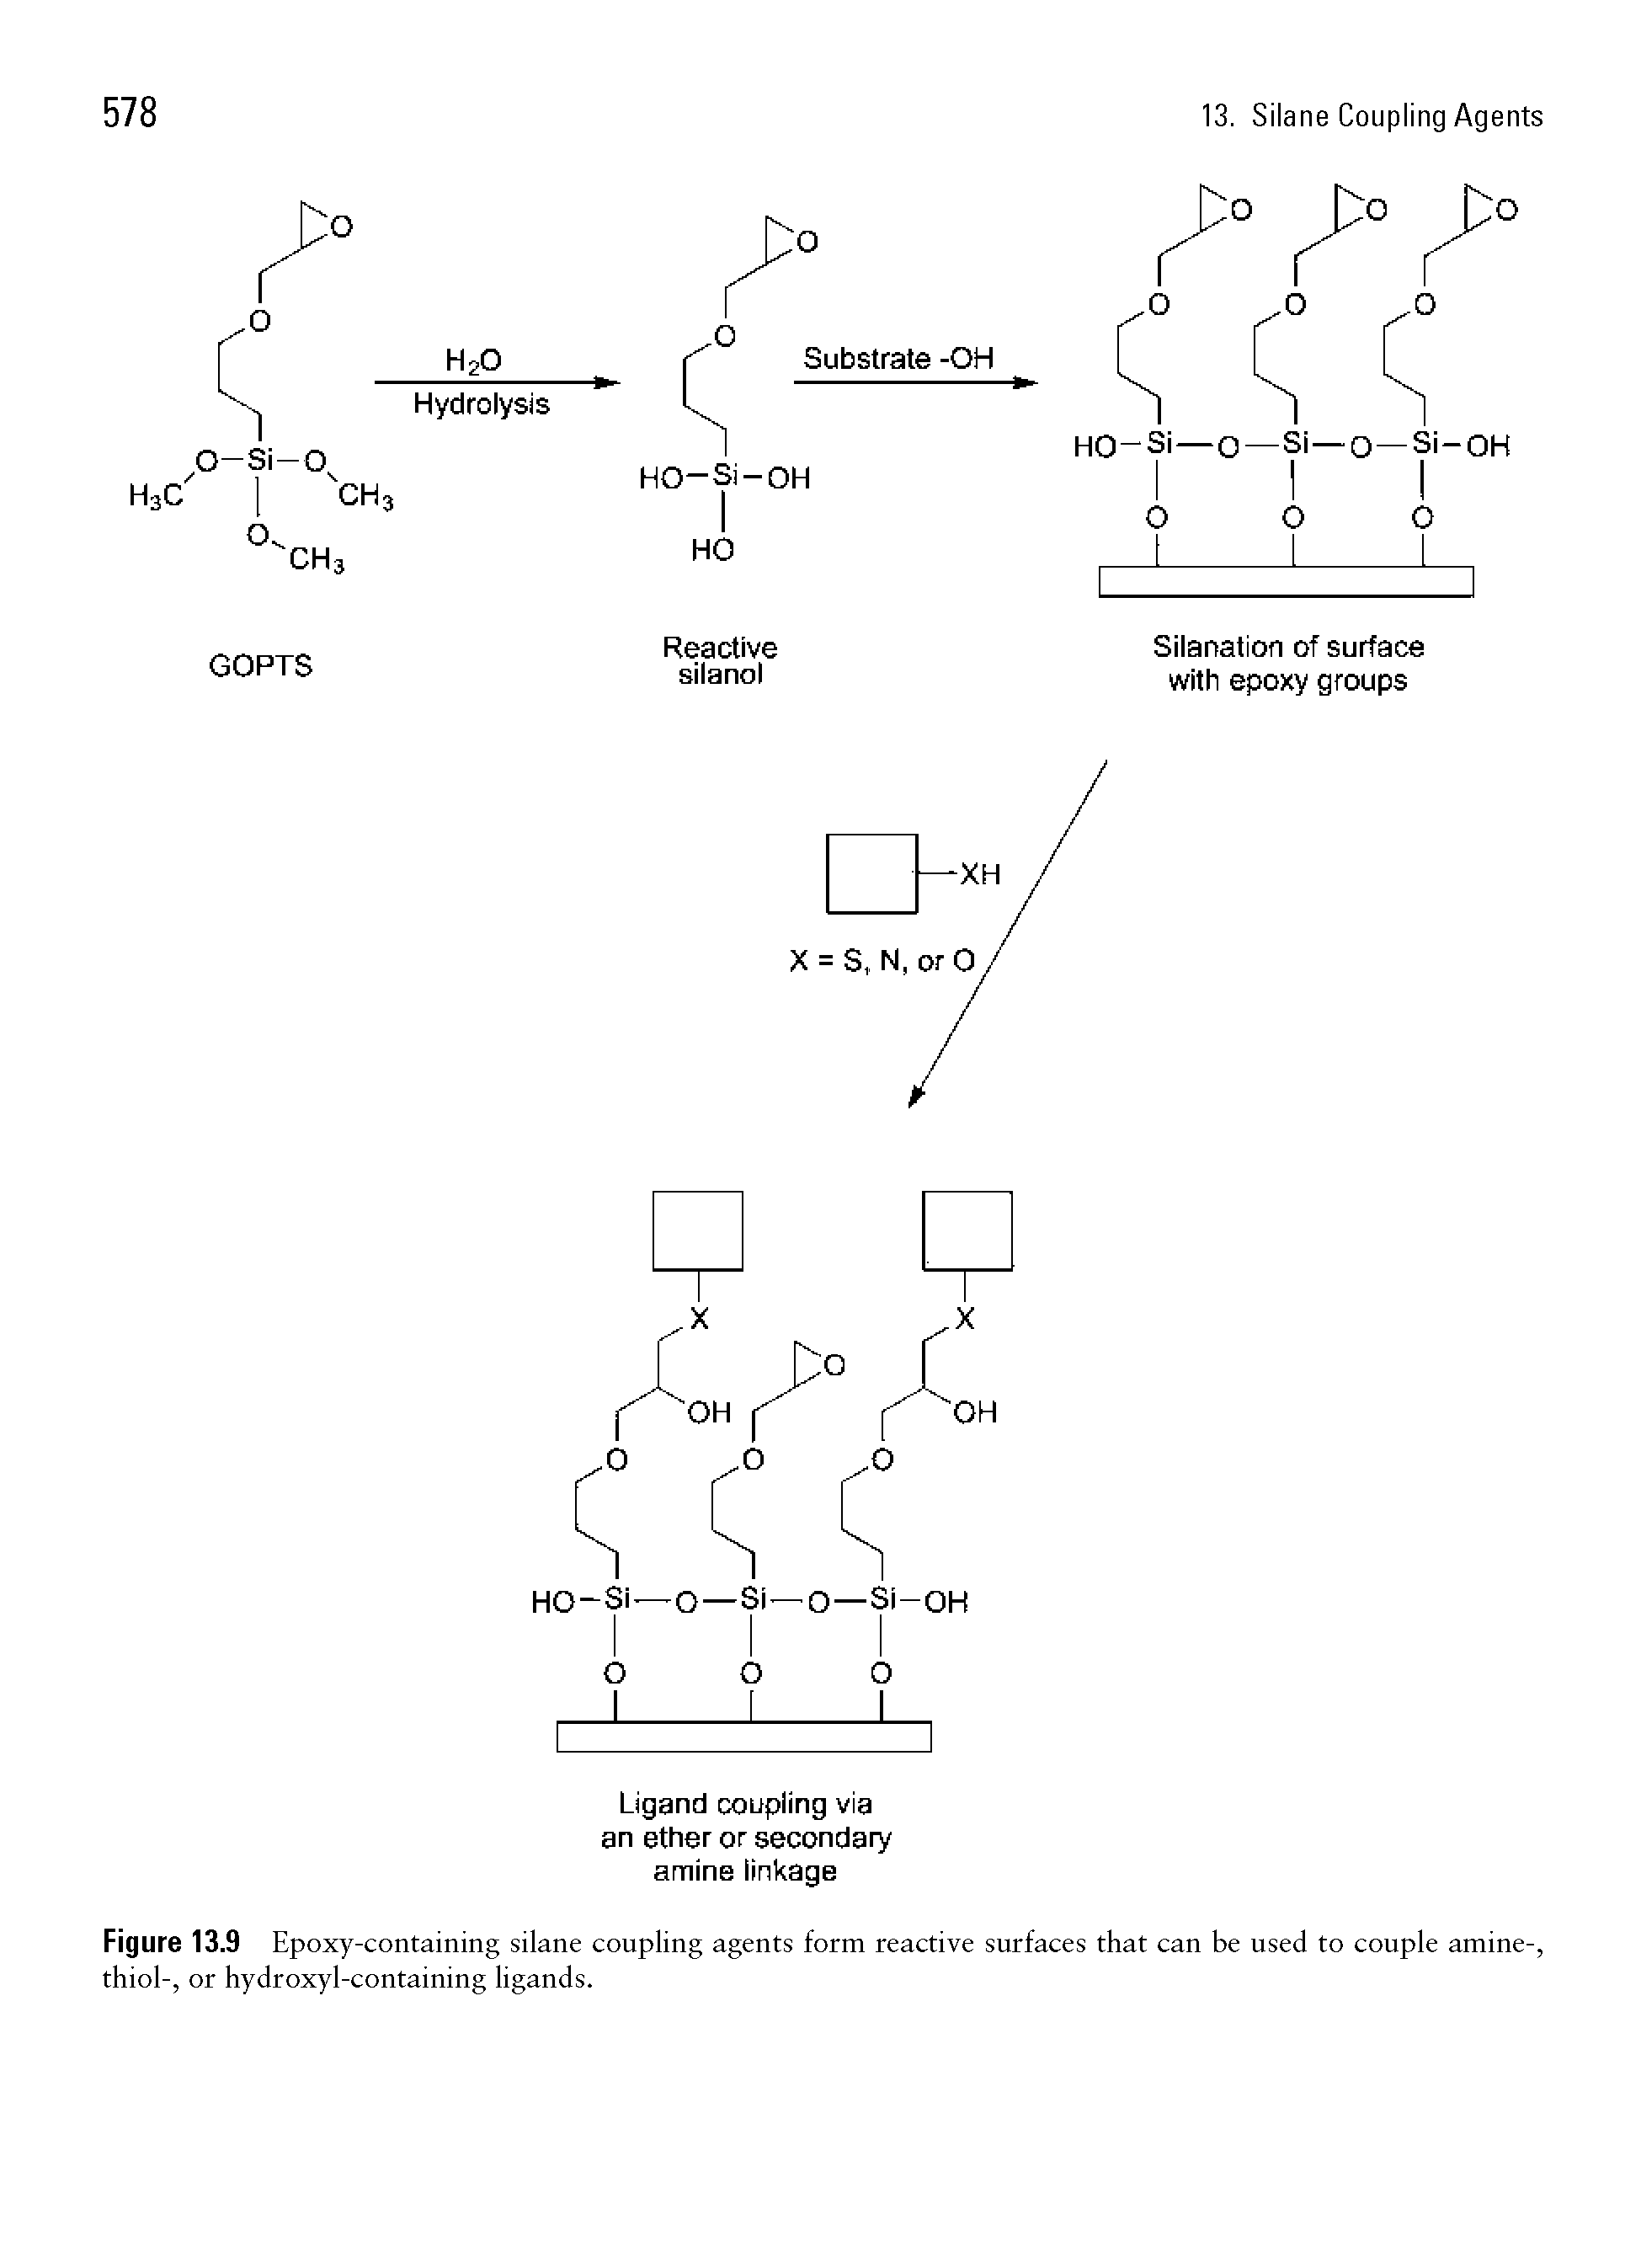 Figure 13.9 Epoxy-containing silane coupling agents form reactive surfaces that can be used to couple amine-, thiol-, or hydroxyl-containing ligands.